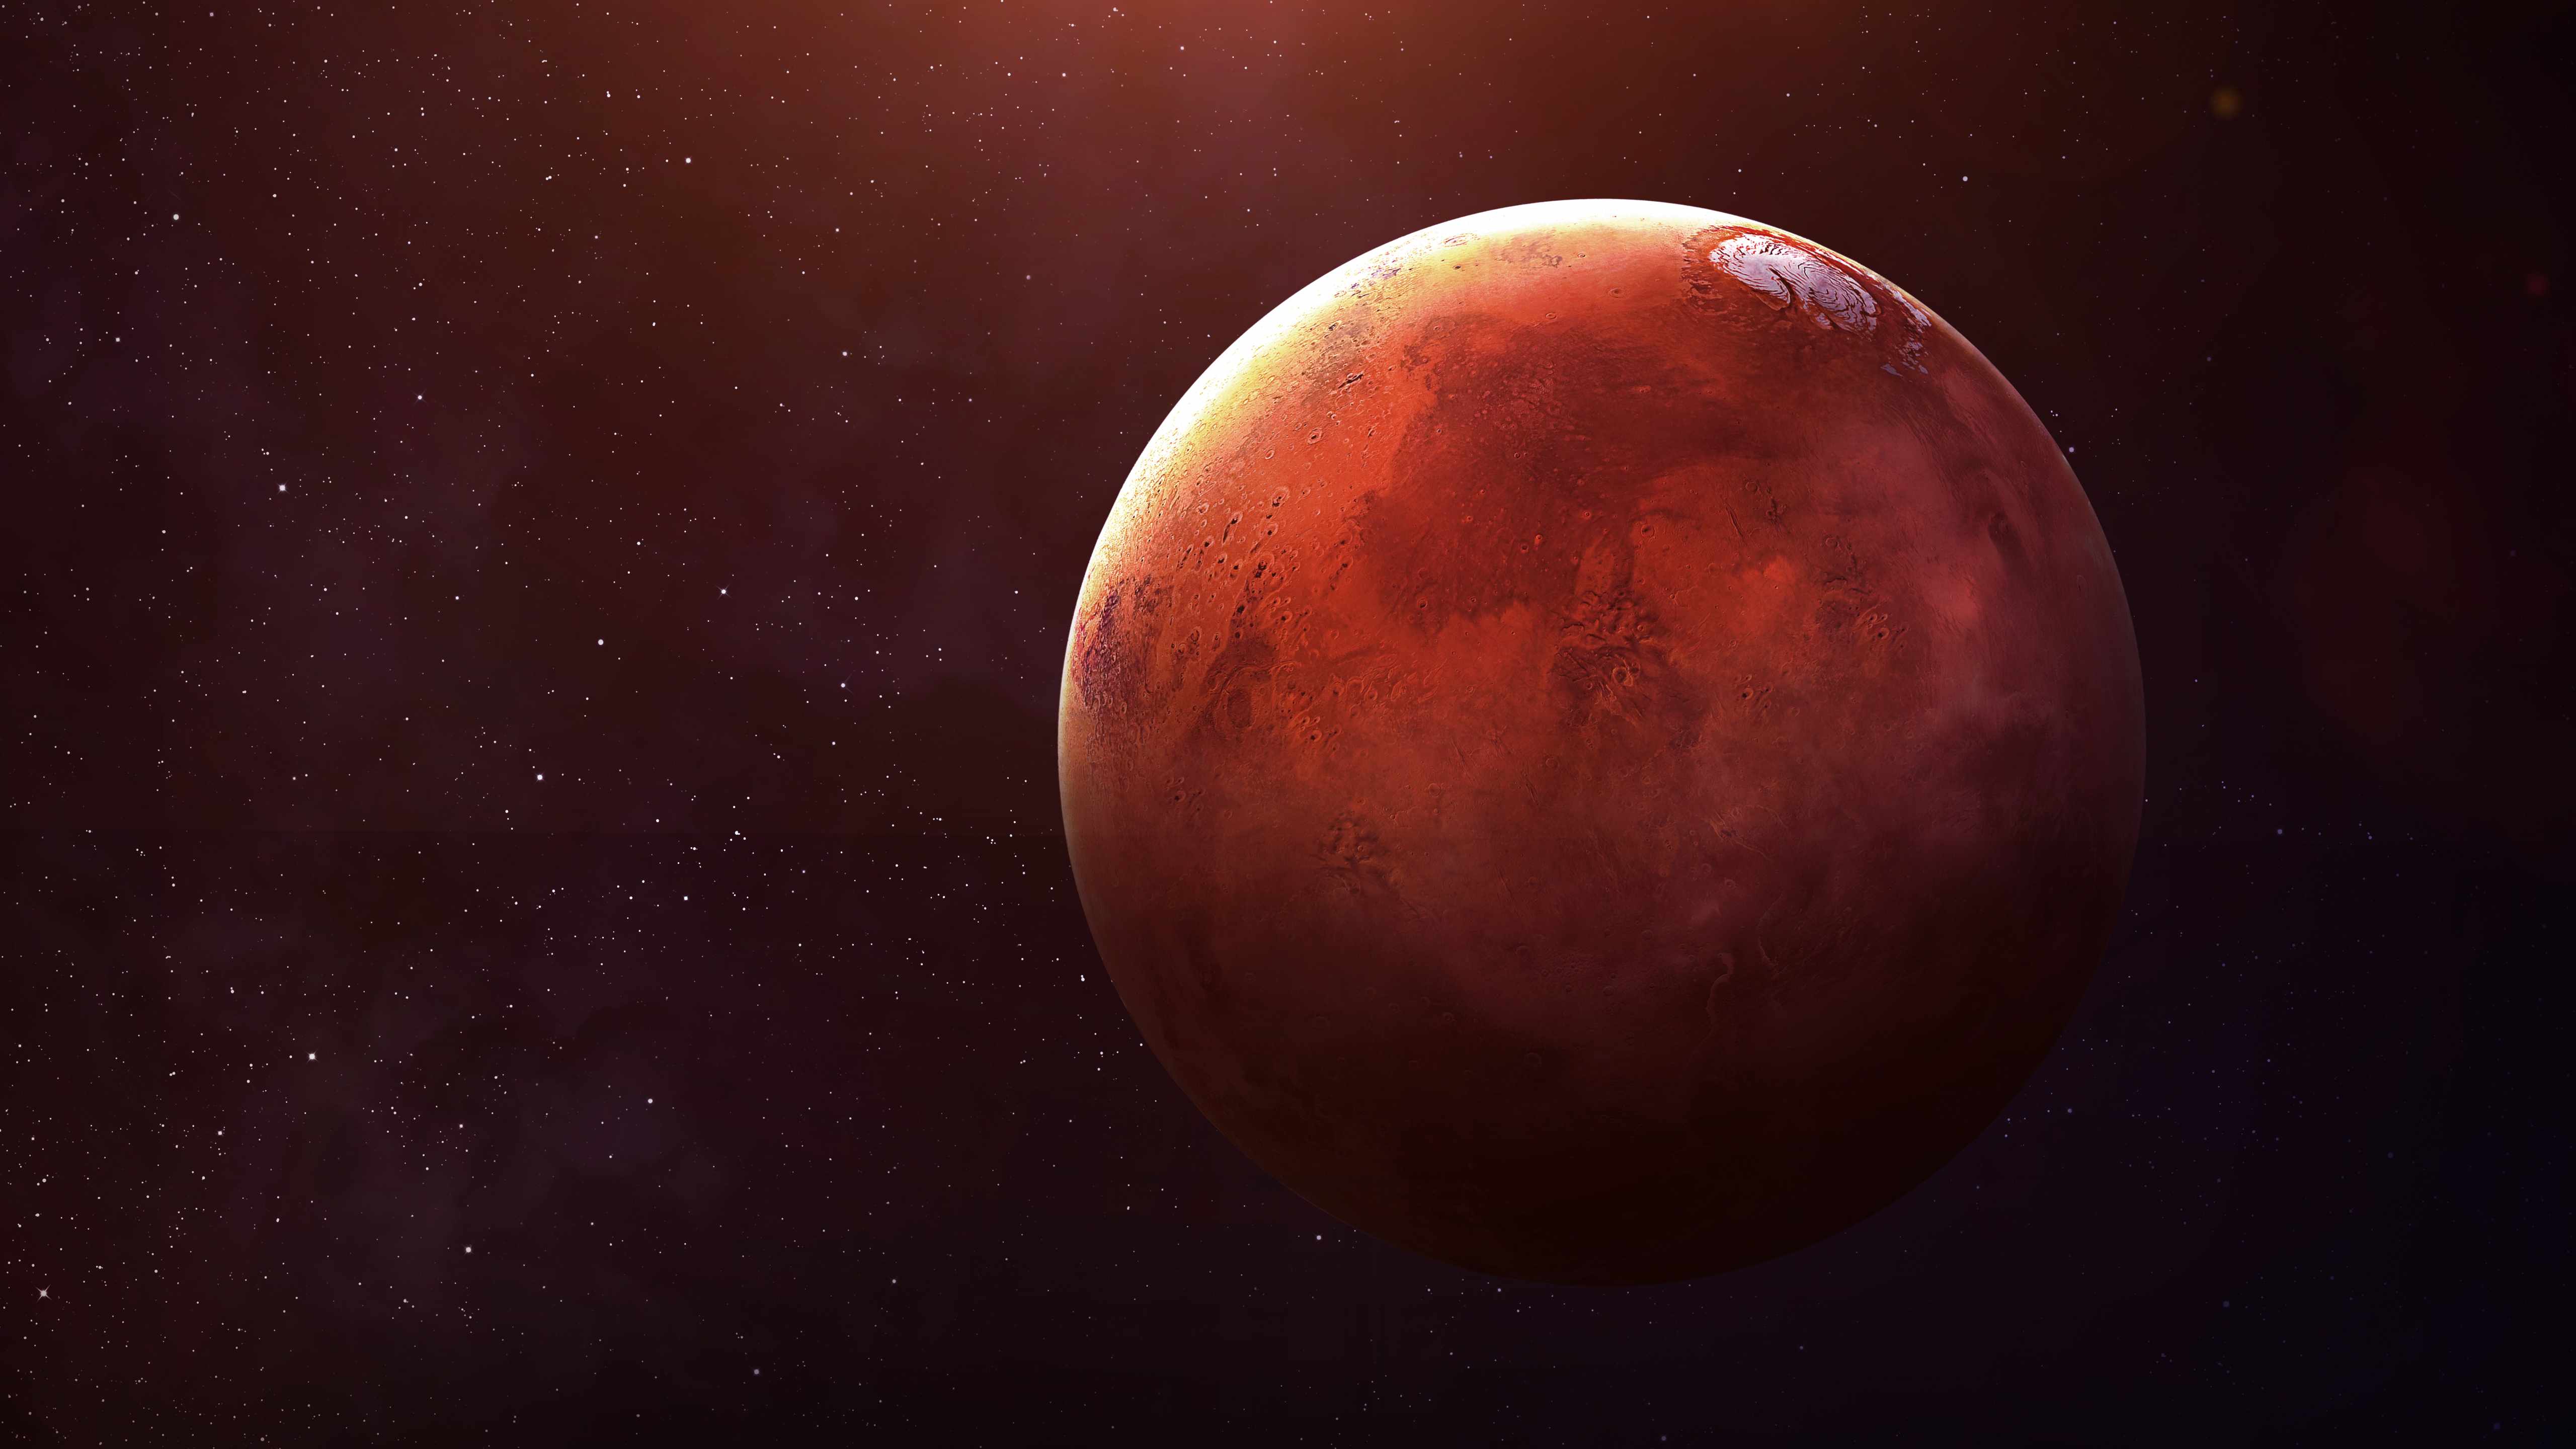 image of planet Mars, red planet